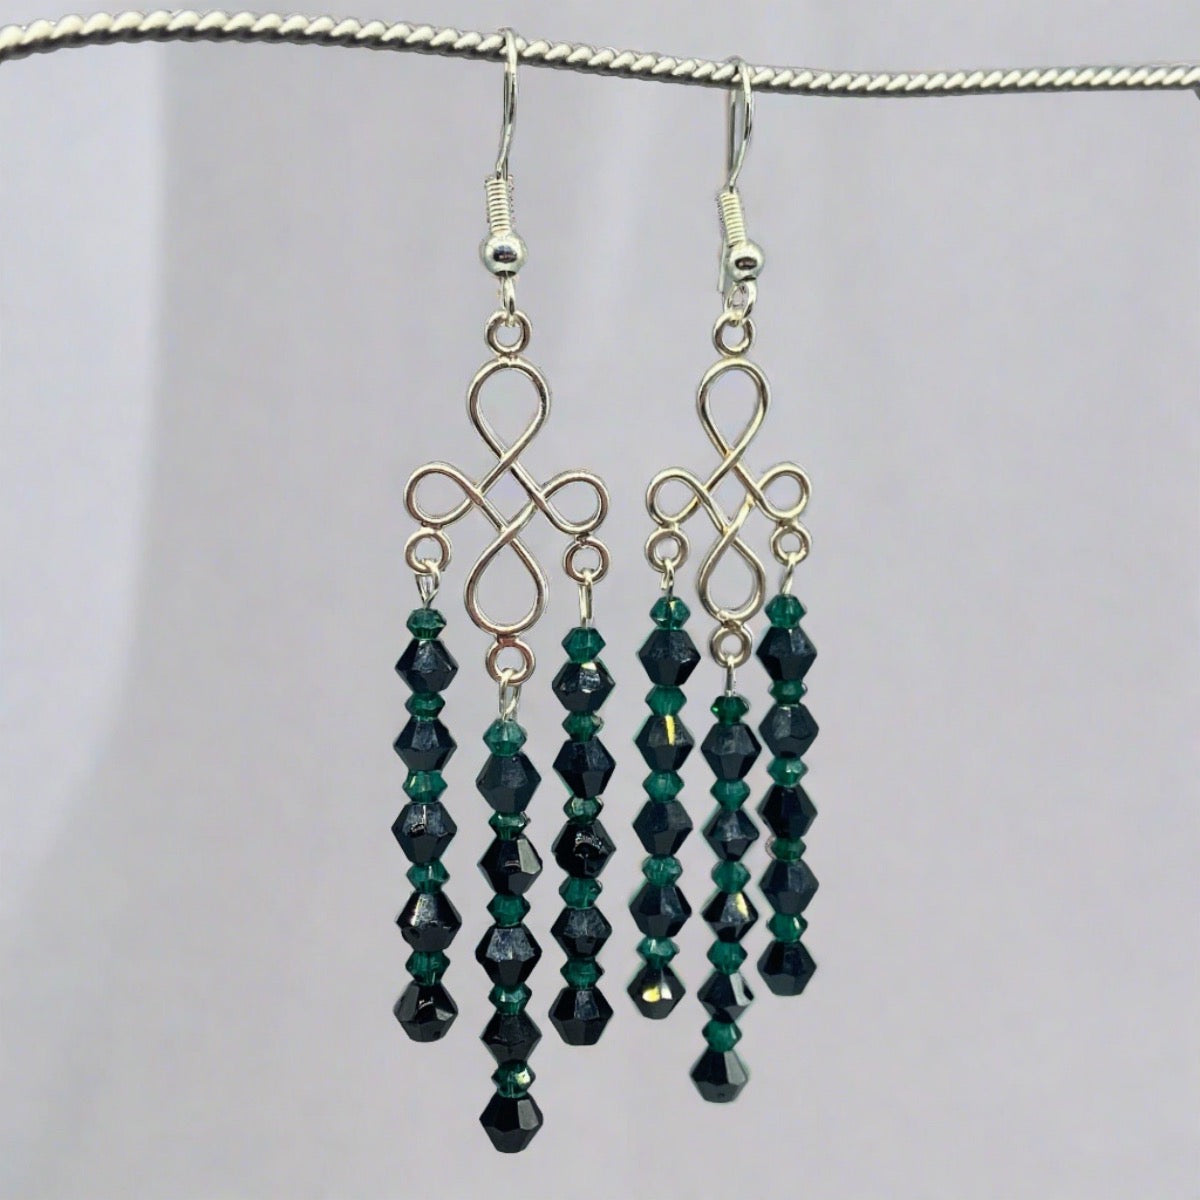 Pair of exquisite green and black chandelier earrings featuring shimmering crystals